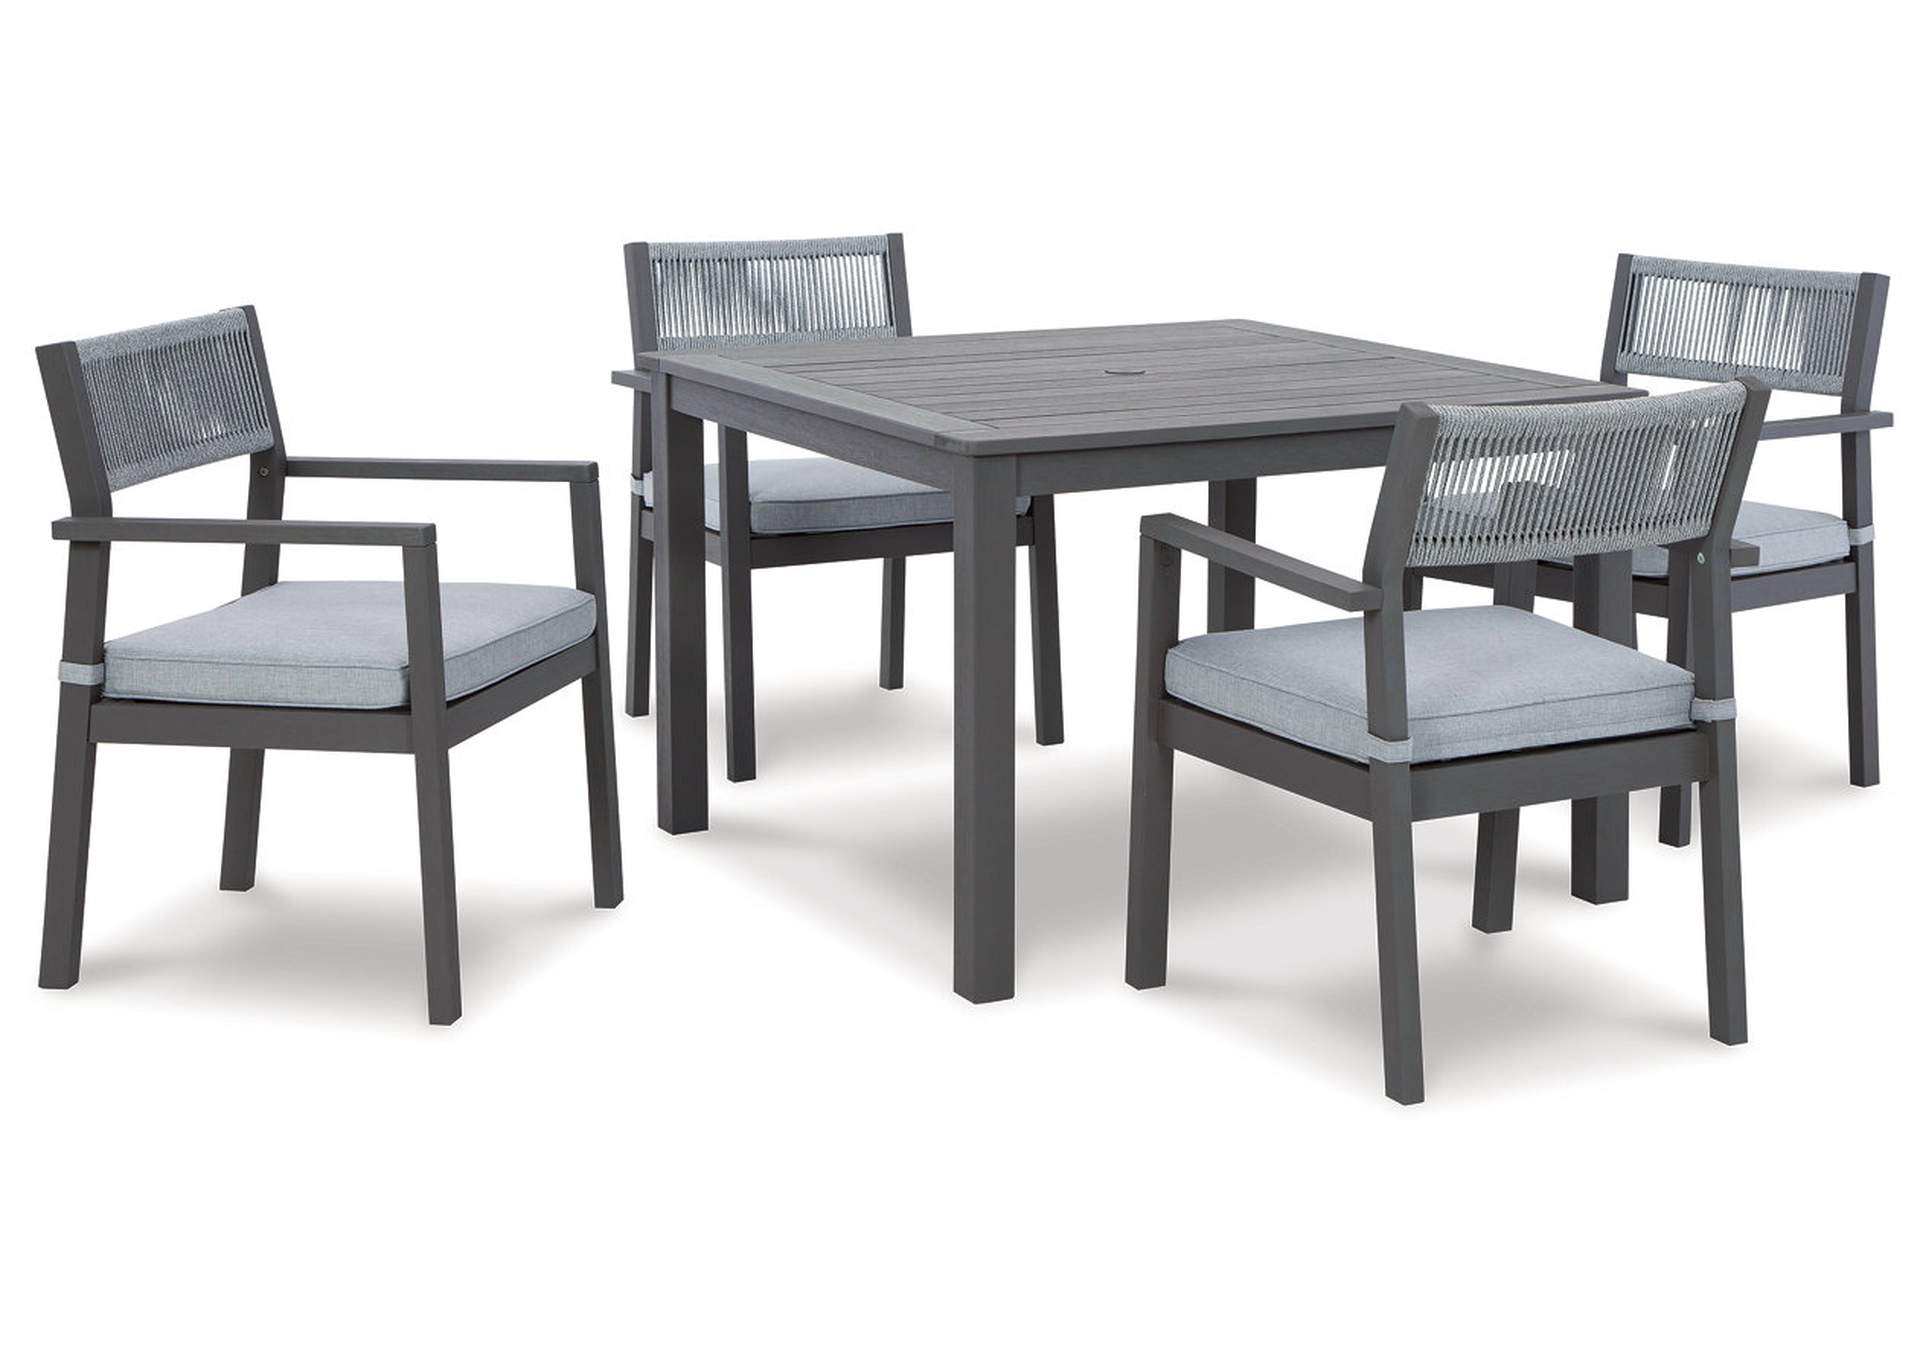 Eden Town Outdoor Dining Table and 4 Chairs,Outdoor By Ashley